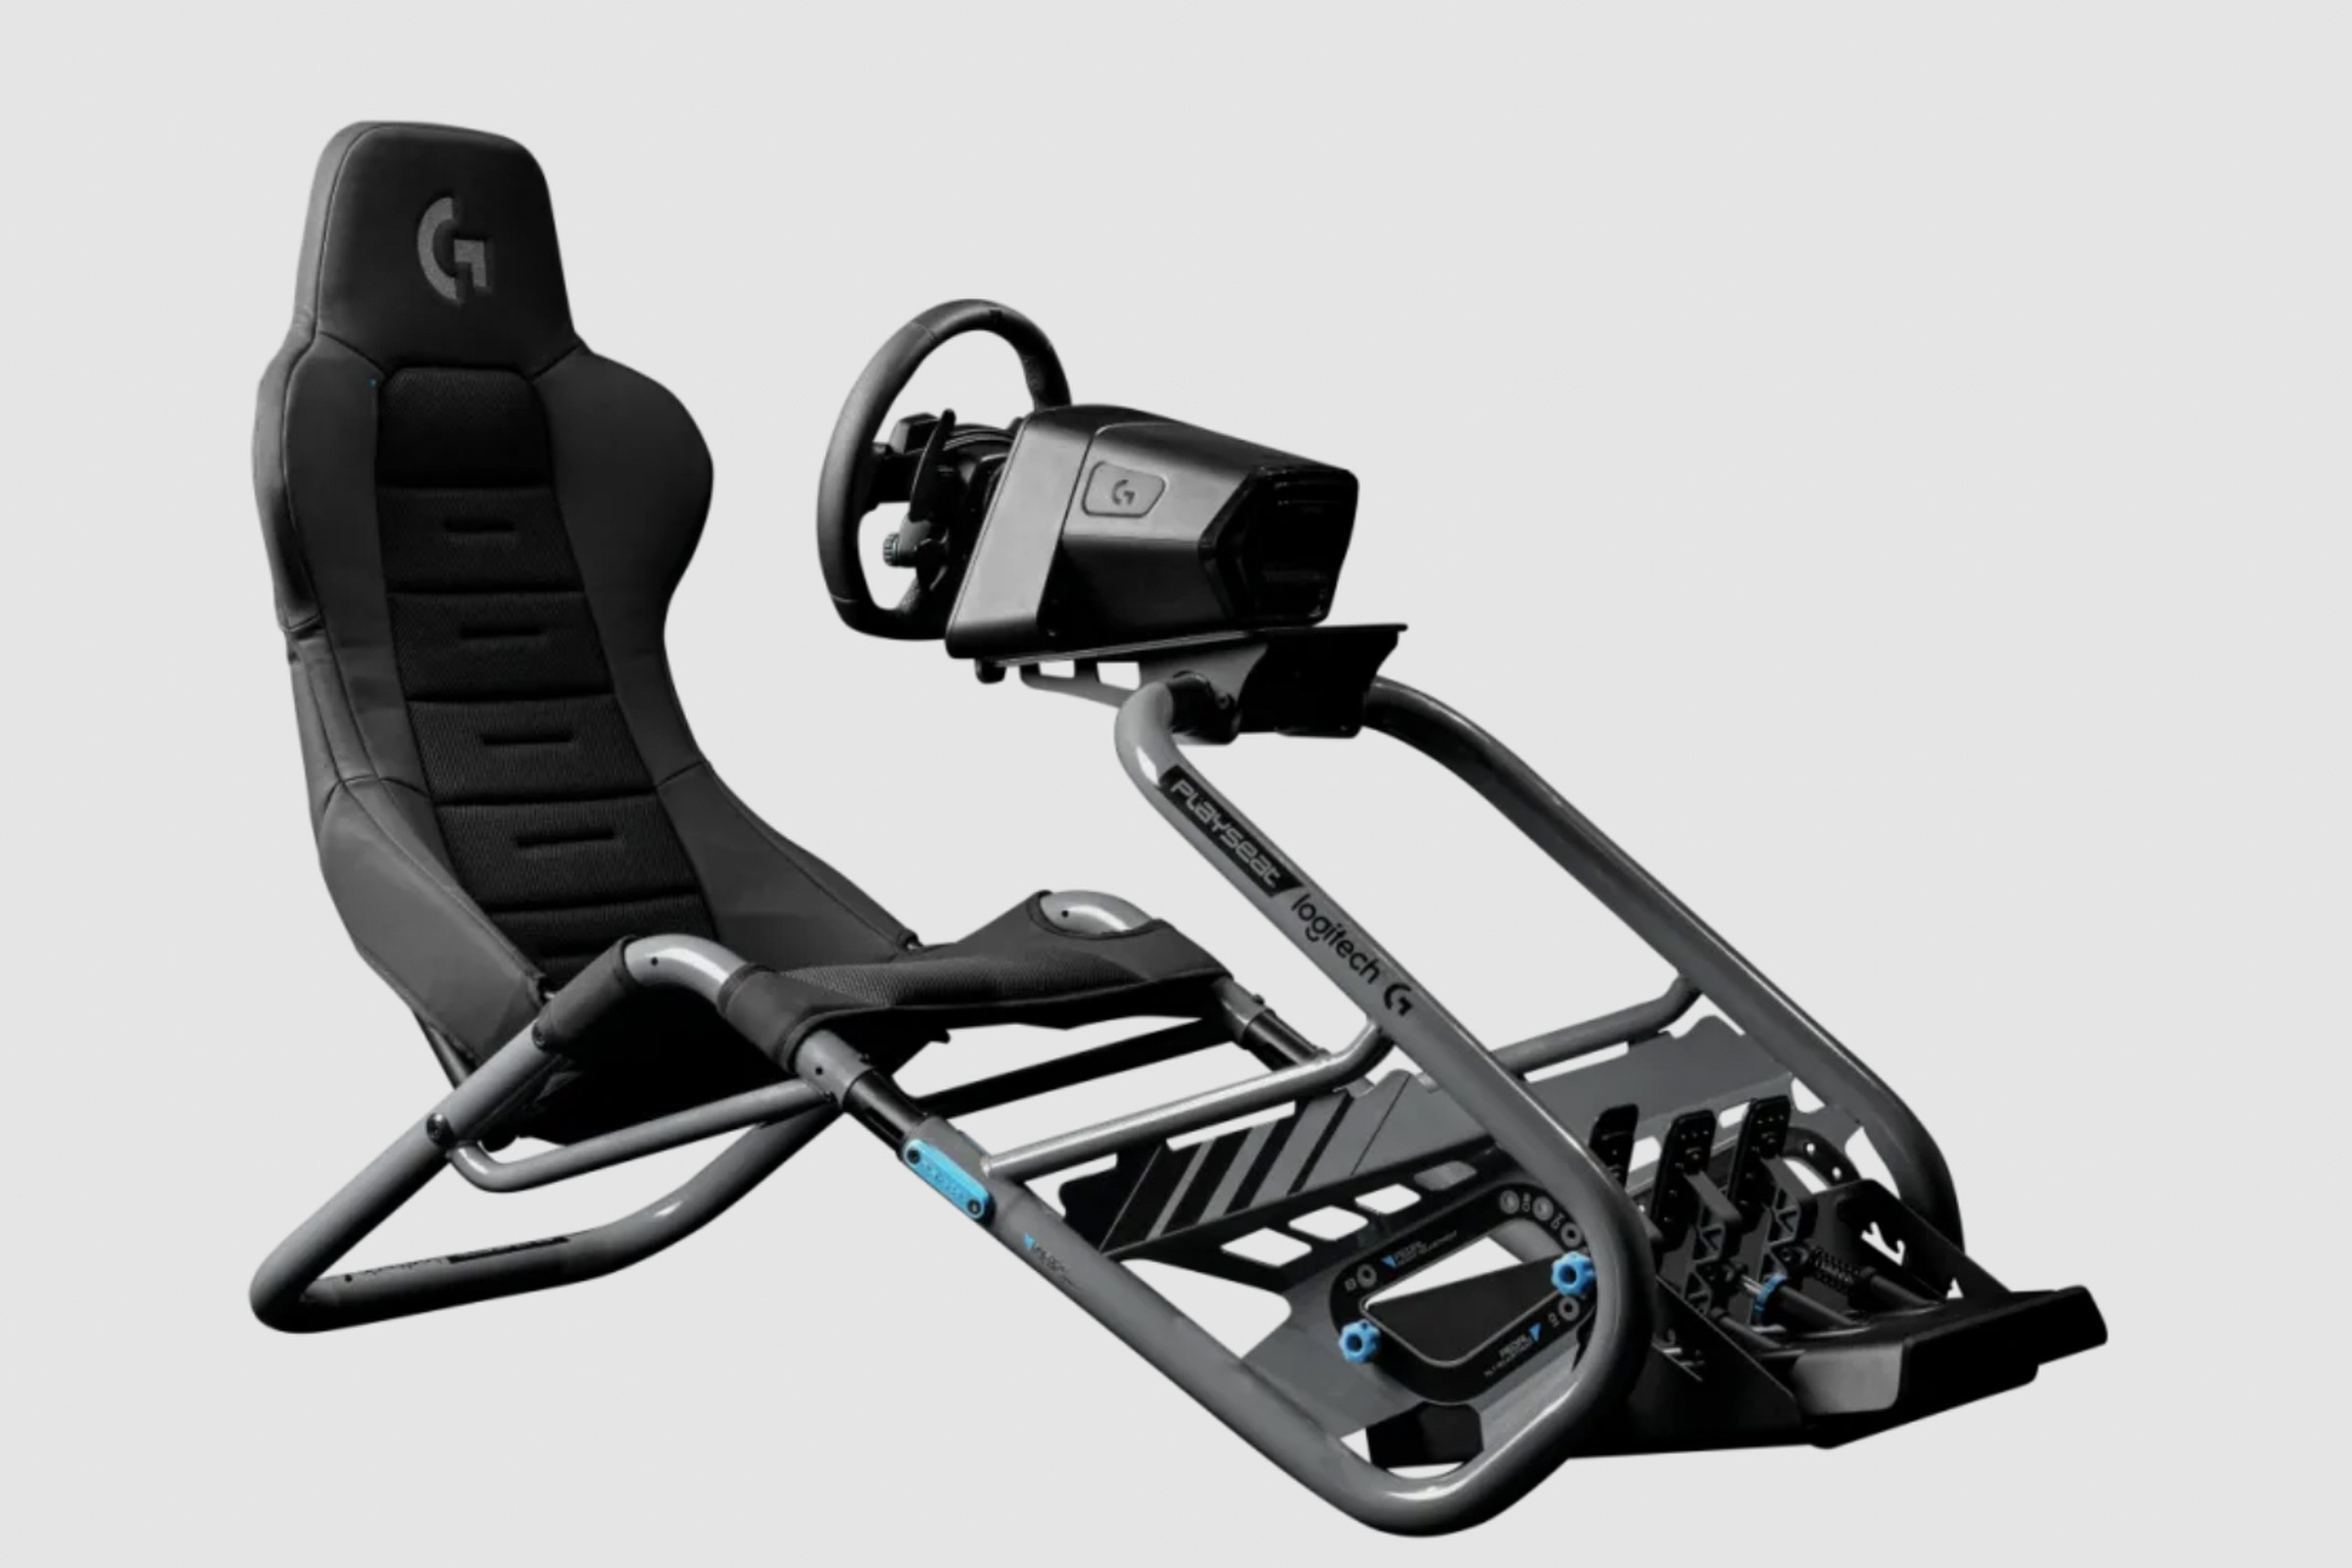 An image showing Logitech and Playseat’s cockpit with a Logitech racing wheel